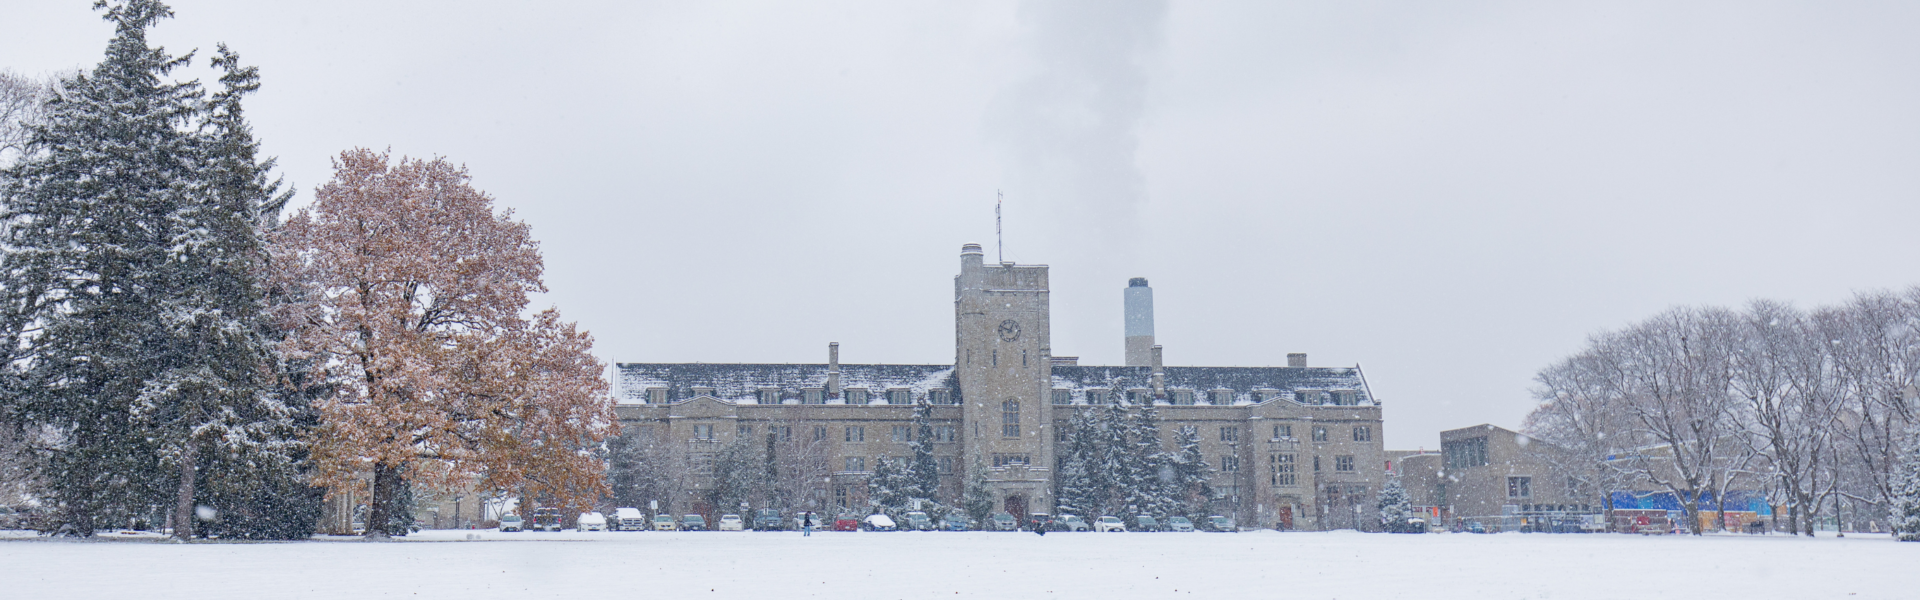 View of Johnston Hall across Johnston Green on a snowy, cloudy day.